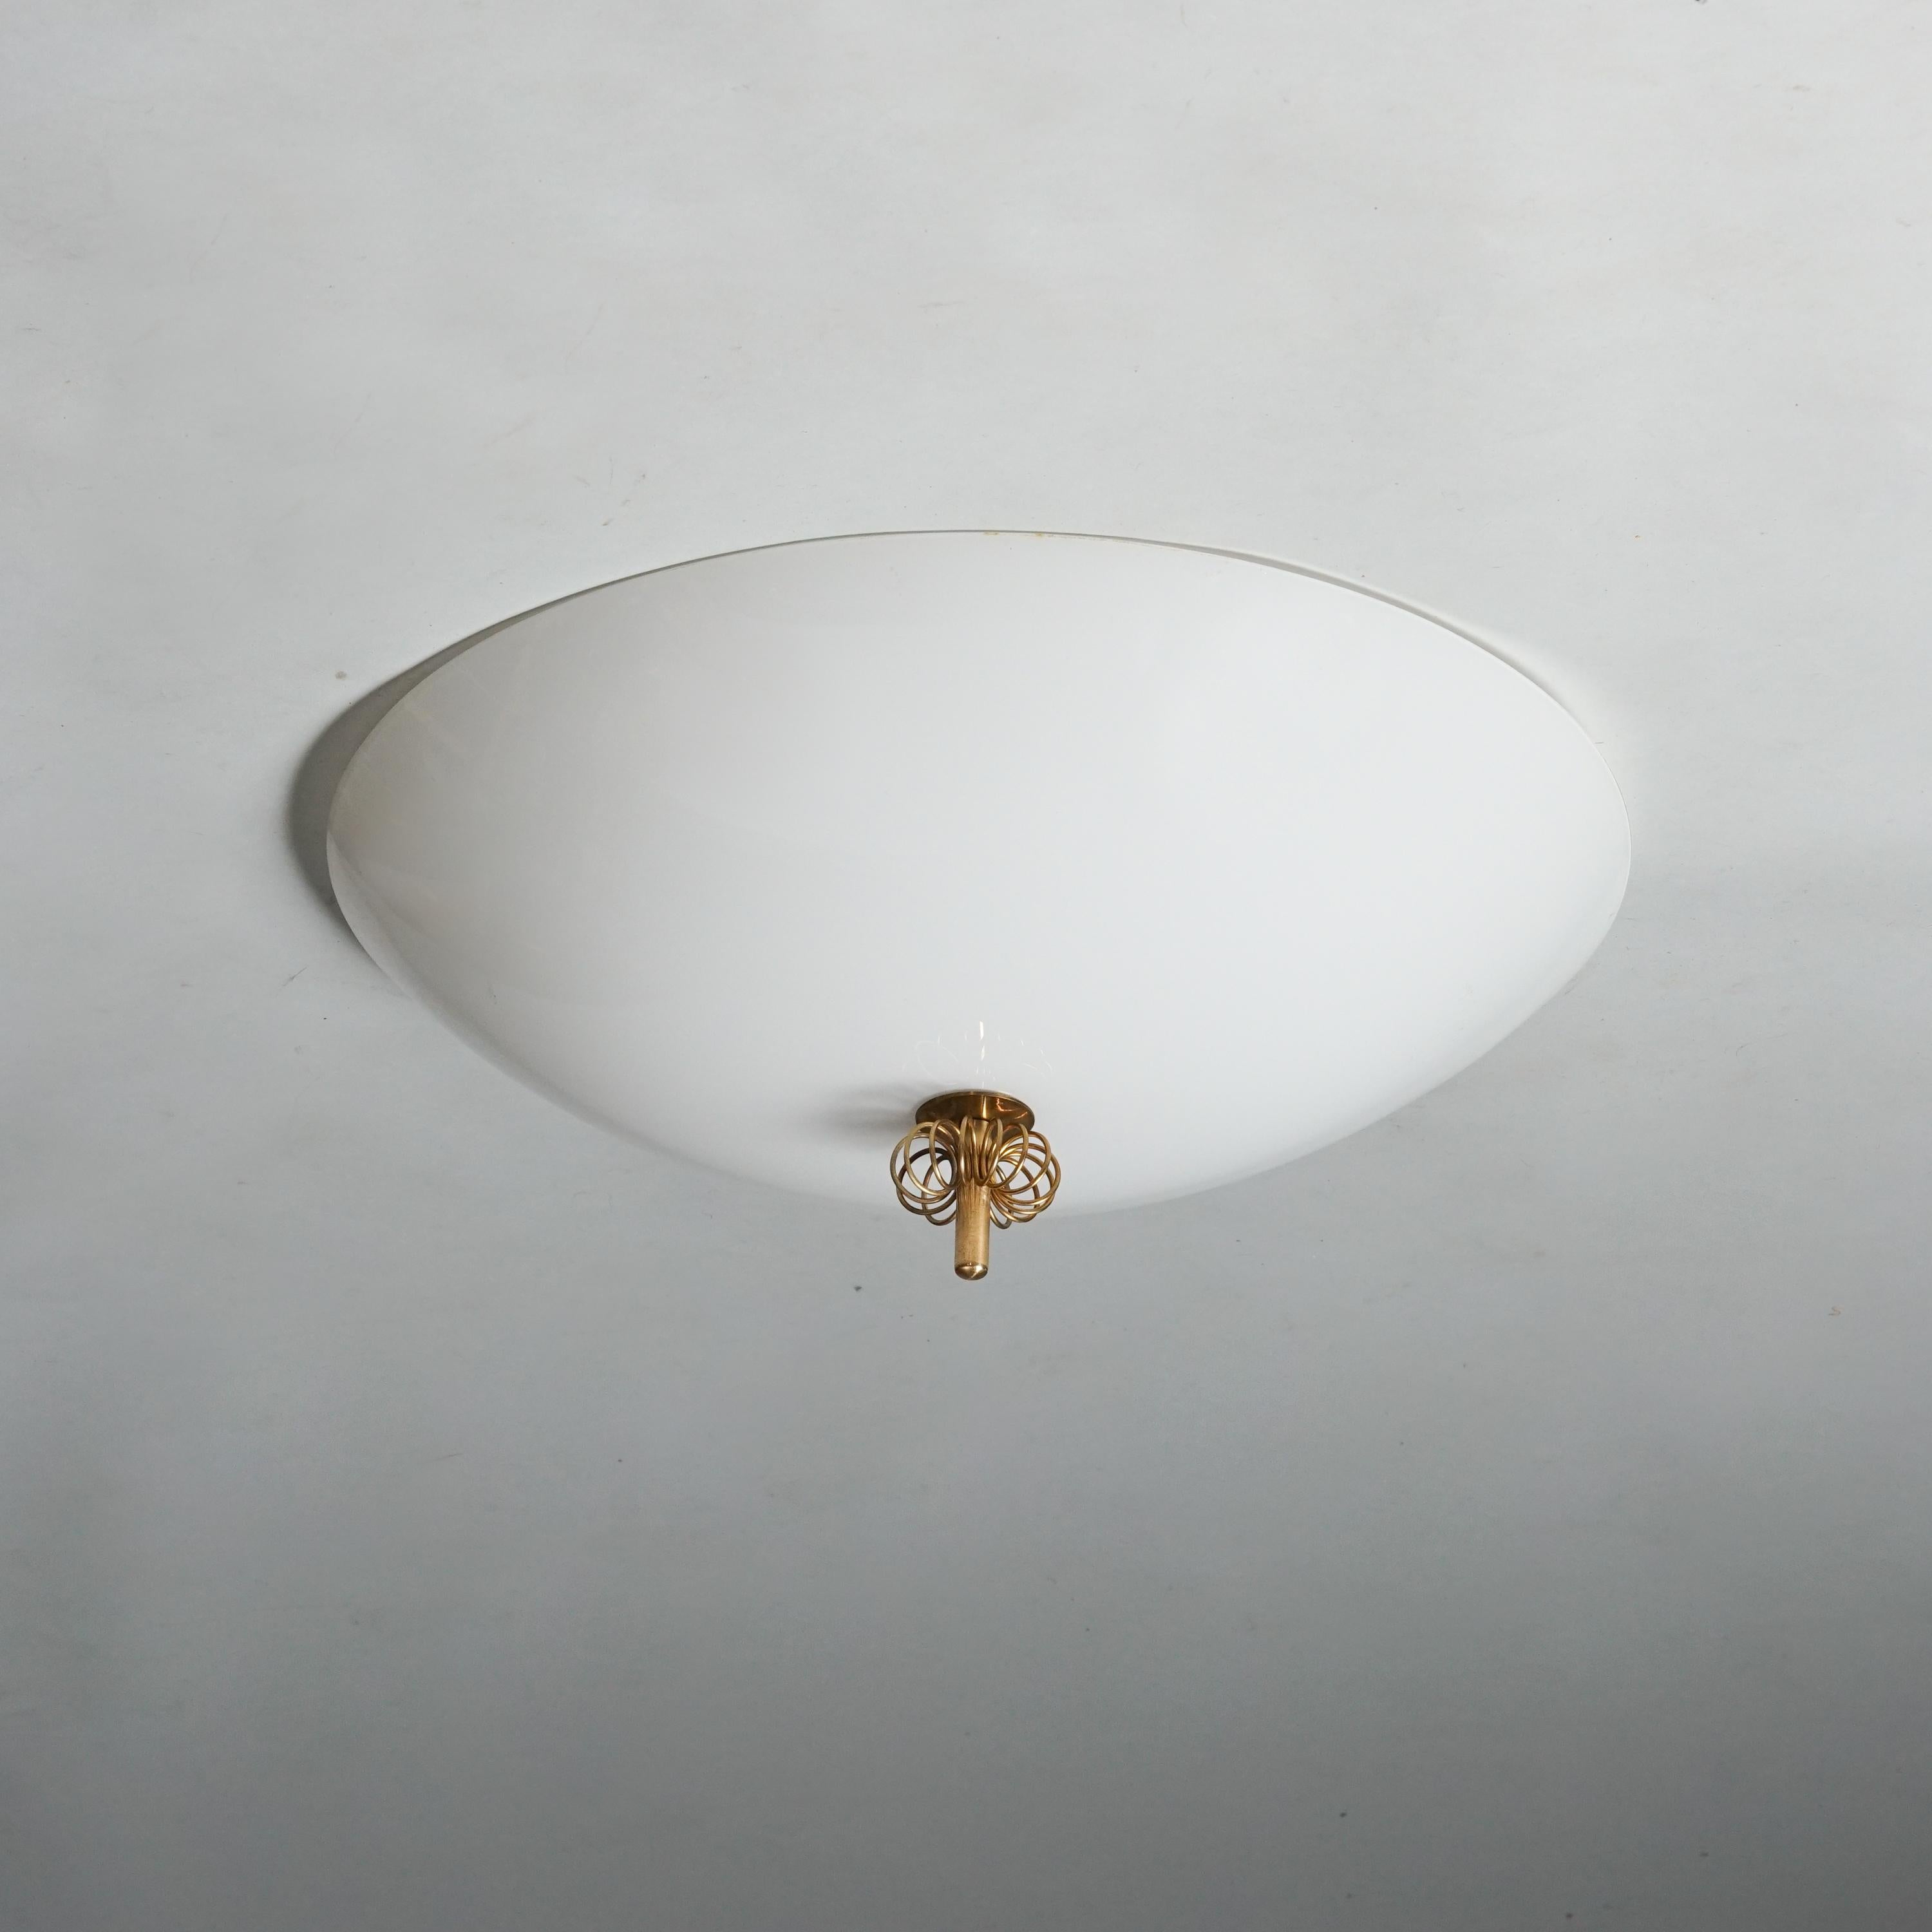 Rare Paavo Tynell Flush Mount Model 2093 in Opaline Glass and Brass. Made in Finland. Circa 1950s.
This piece gives you classic Paavo Tynell details and a beautiful light sheds through the opaline glass shade. 